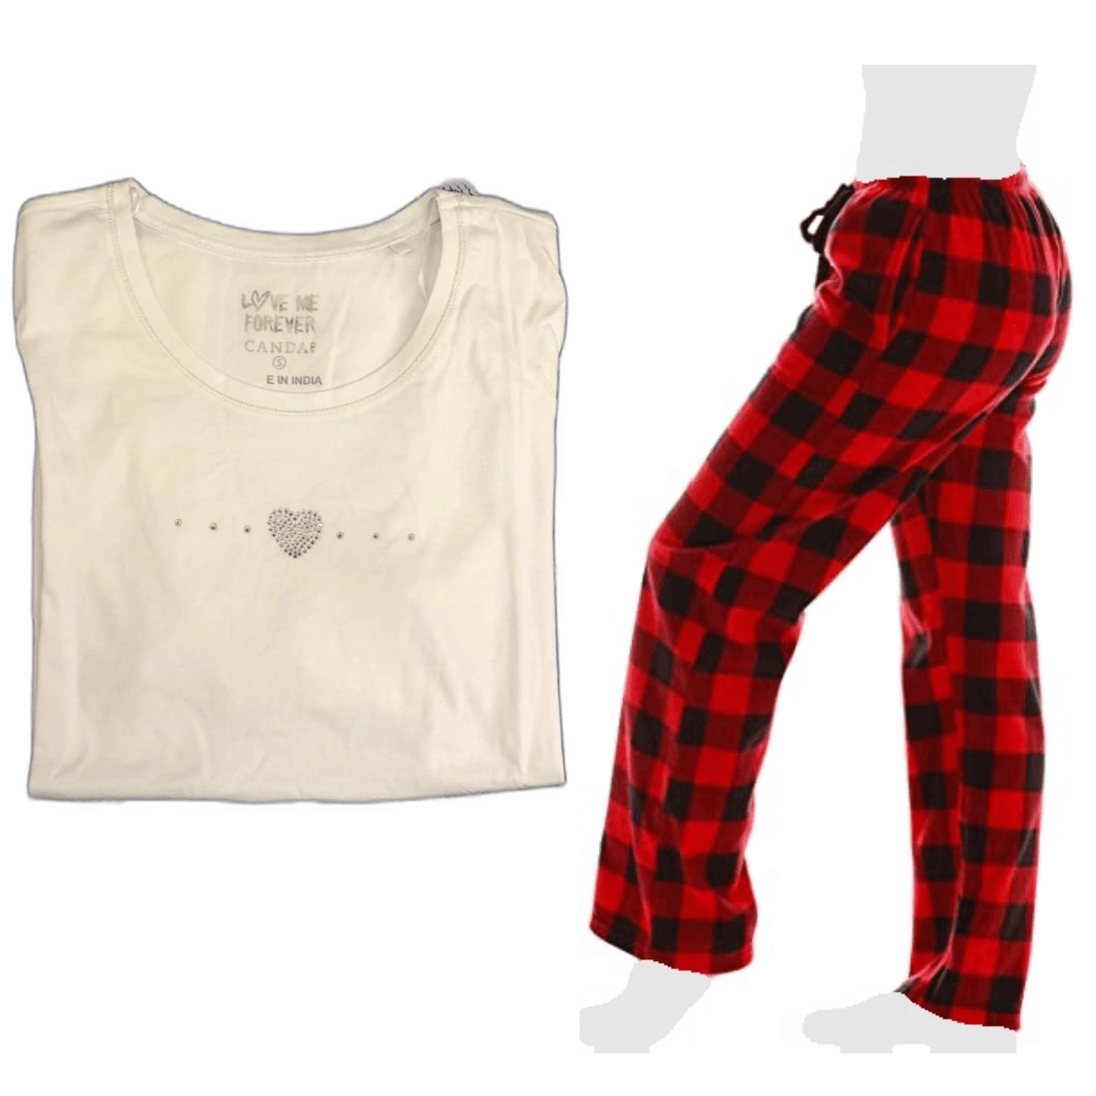 Women's Cozy Pajama Set Plush Red Pants and Cotton Soft Heart T shirt by Just Love - PremiumBrandGoods